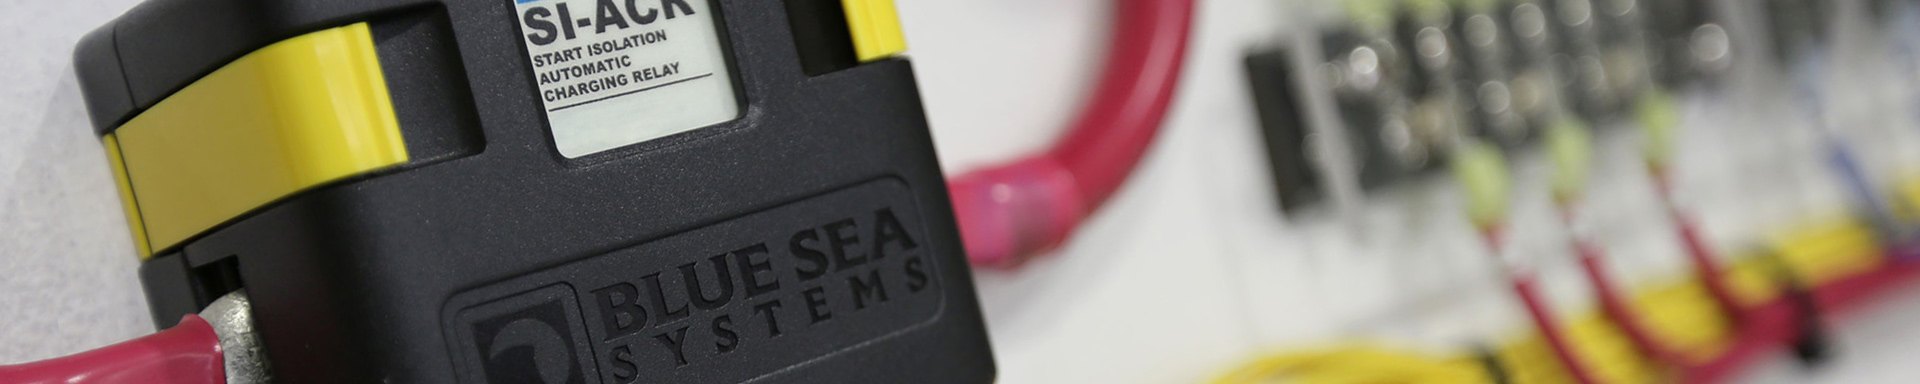 Blue Sea Systems Marine Plugs & Outlets